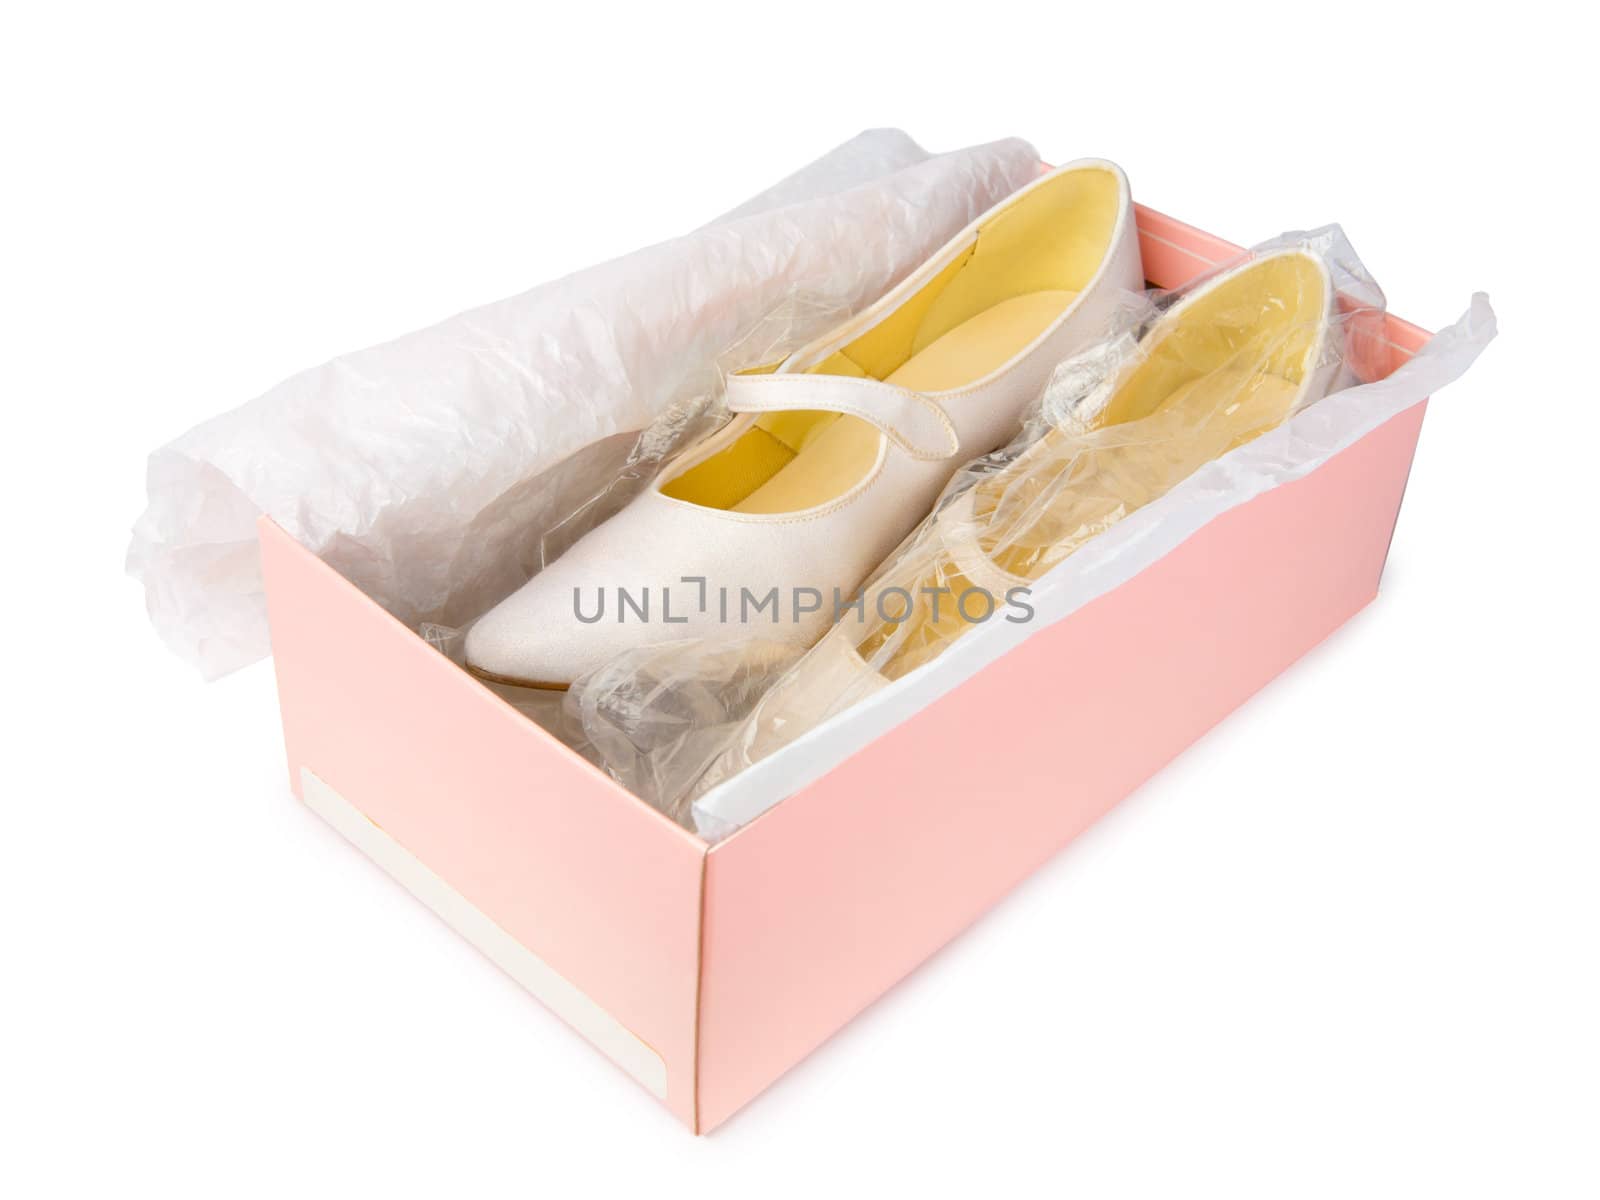 Pair of beautiful shoes in box isolated on white background